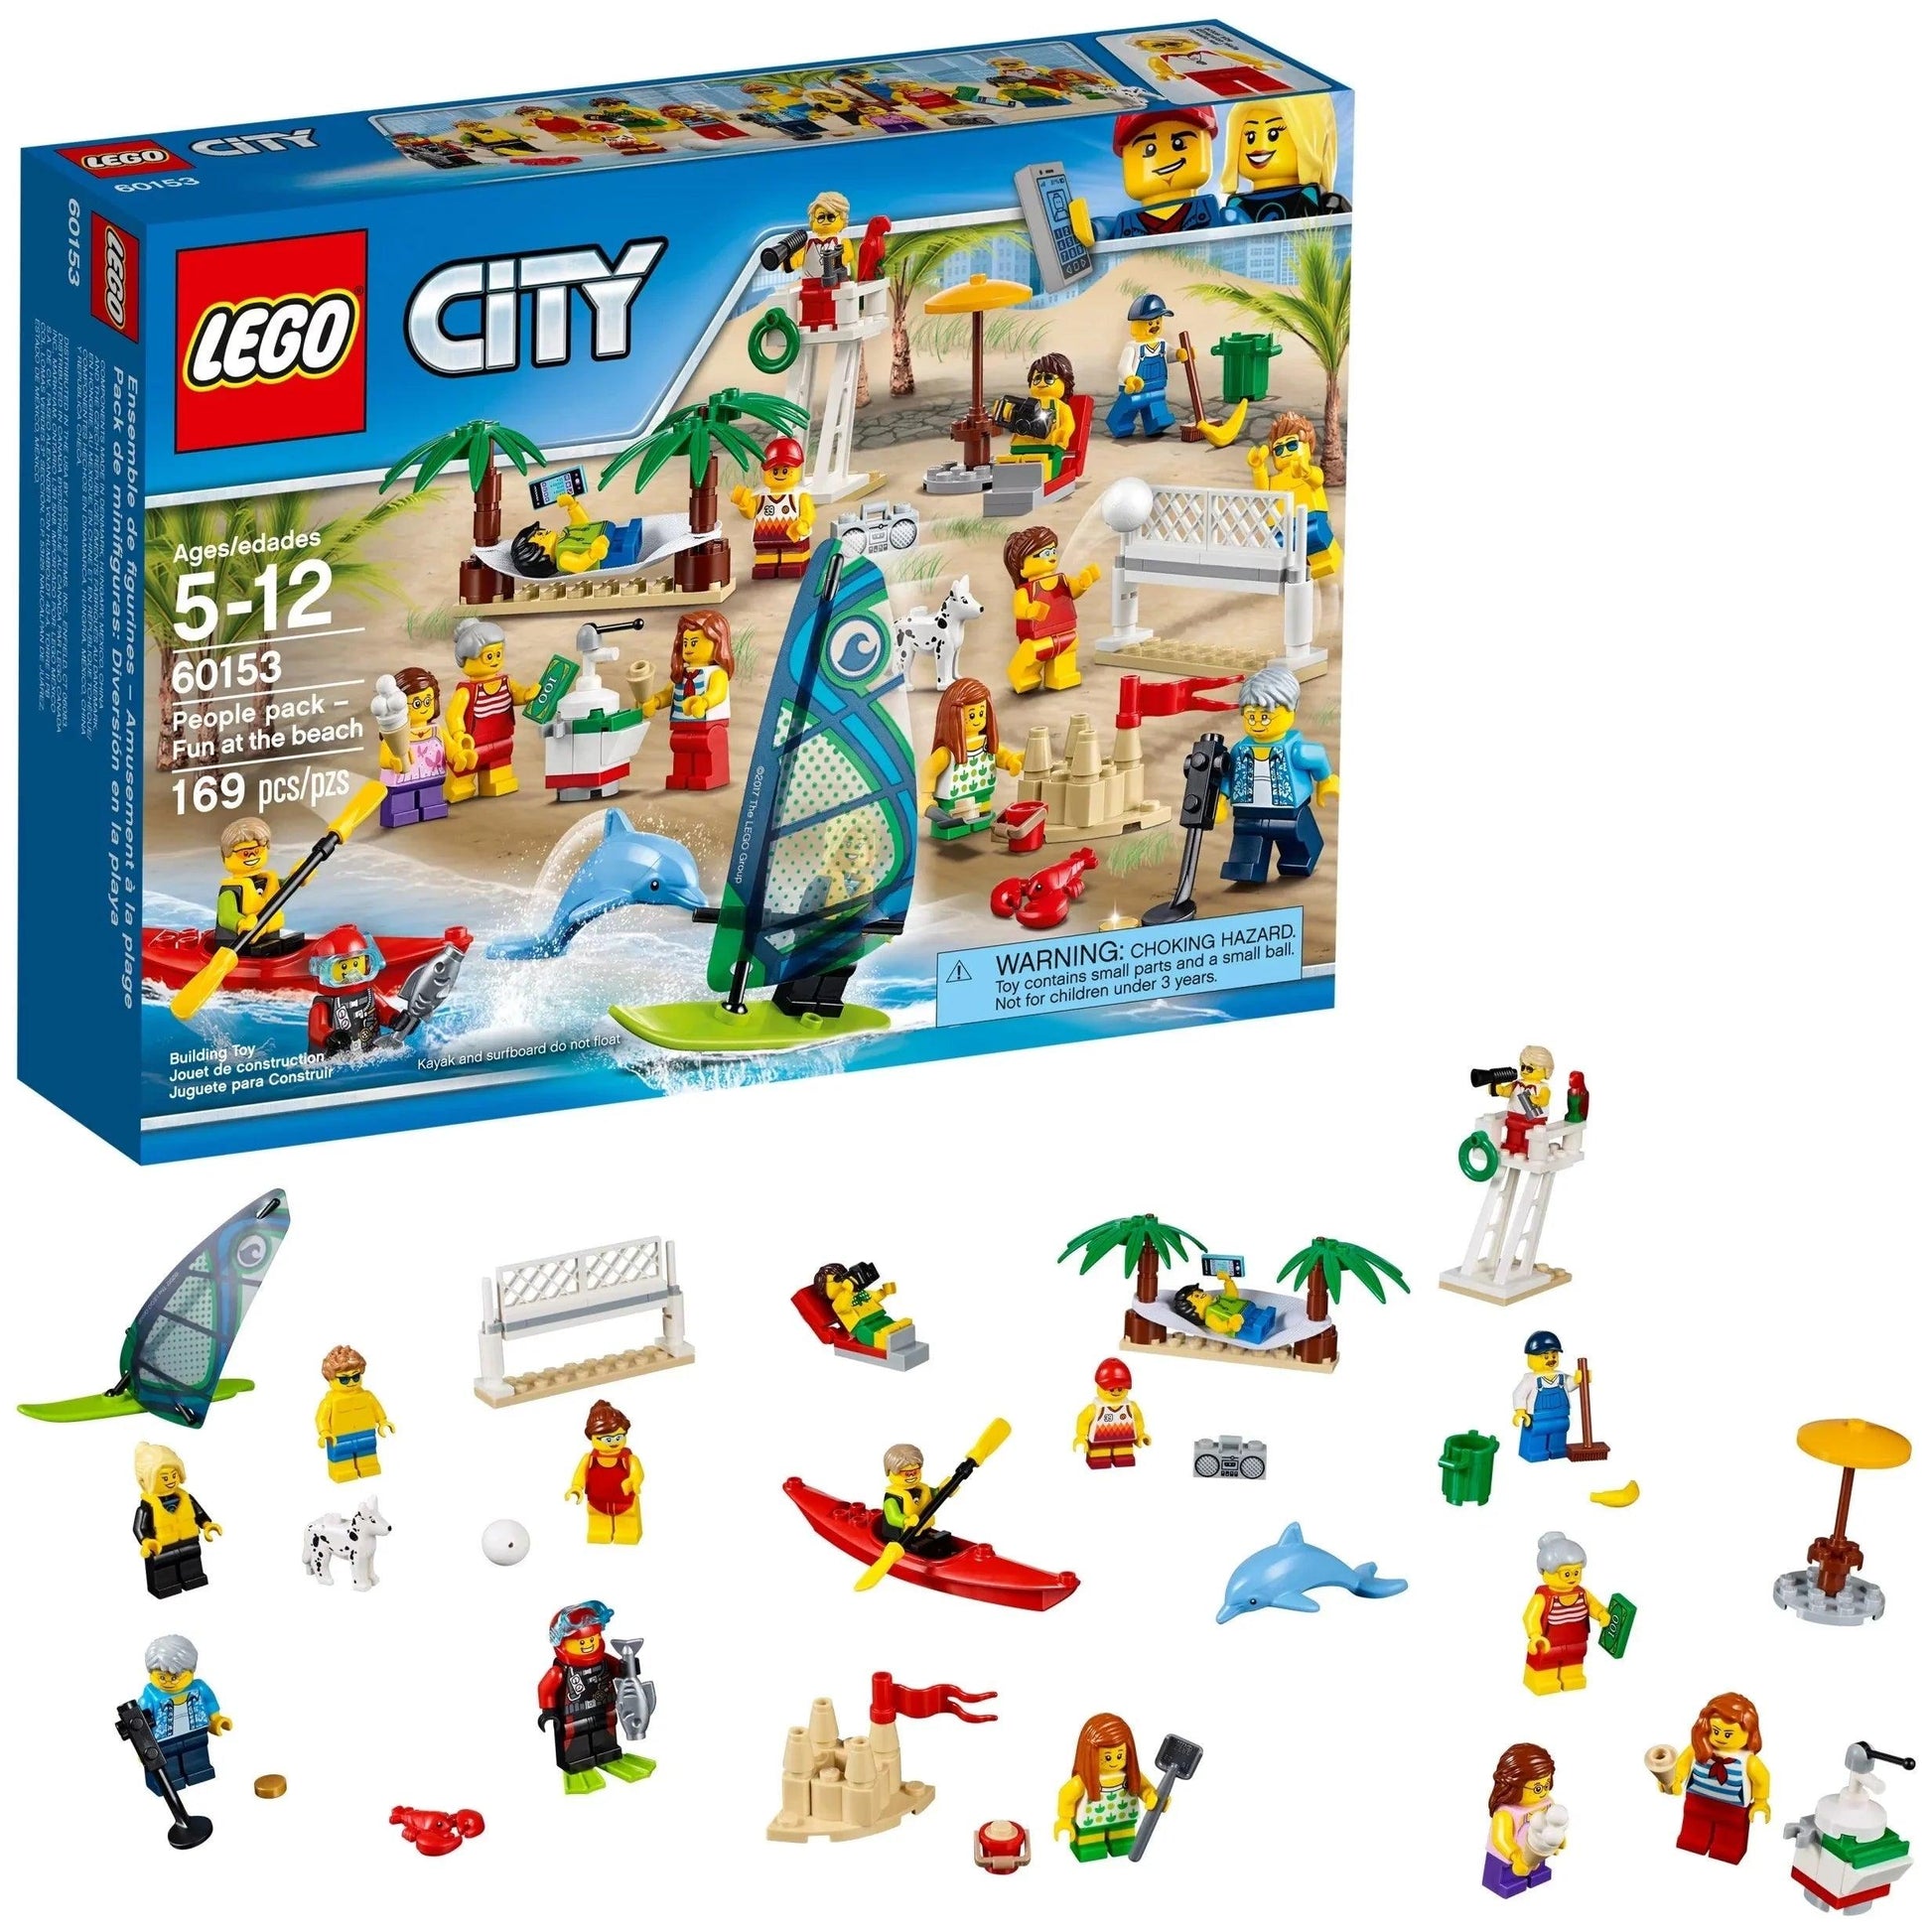 LEGO People Pack - Fun at the Beach 60153 City LEGO CITY VILLE @ 2TTOYS LEGO €. 49.99